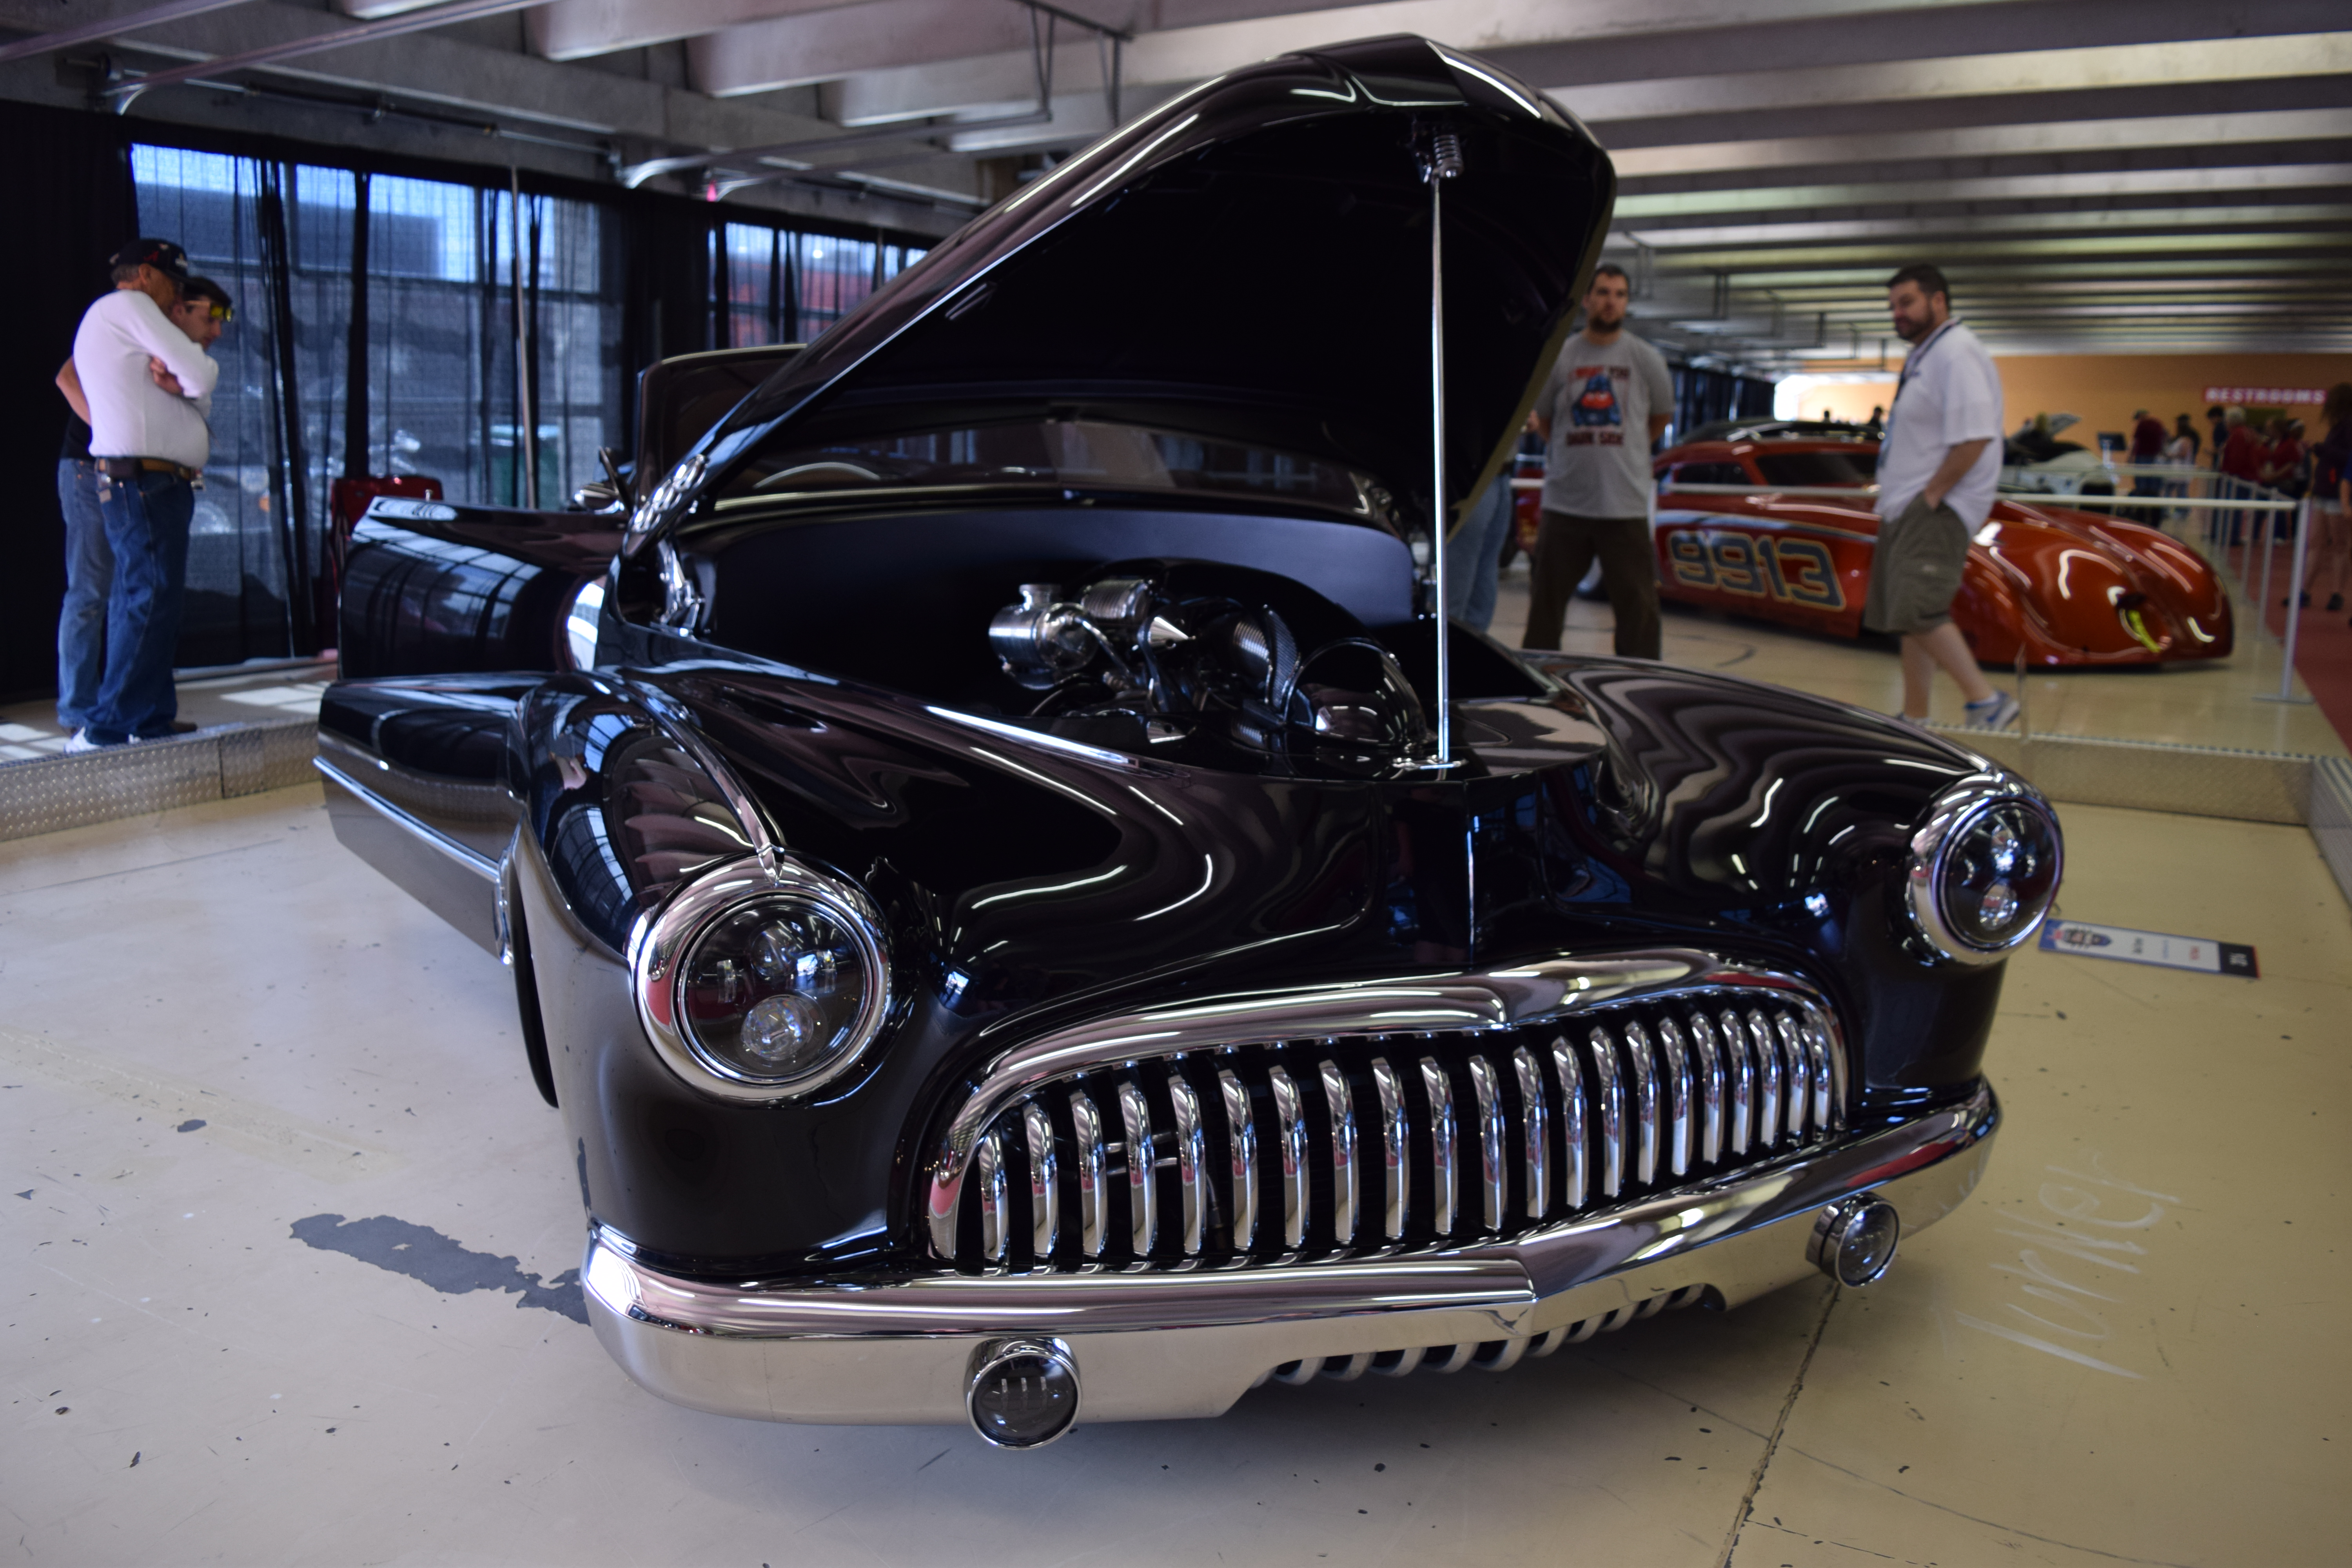 Dale Turner's 1947 Buick Super Convertible